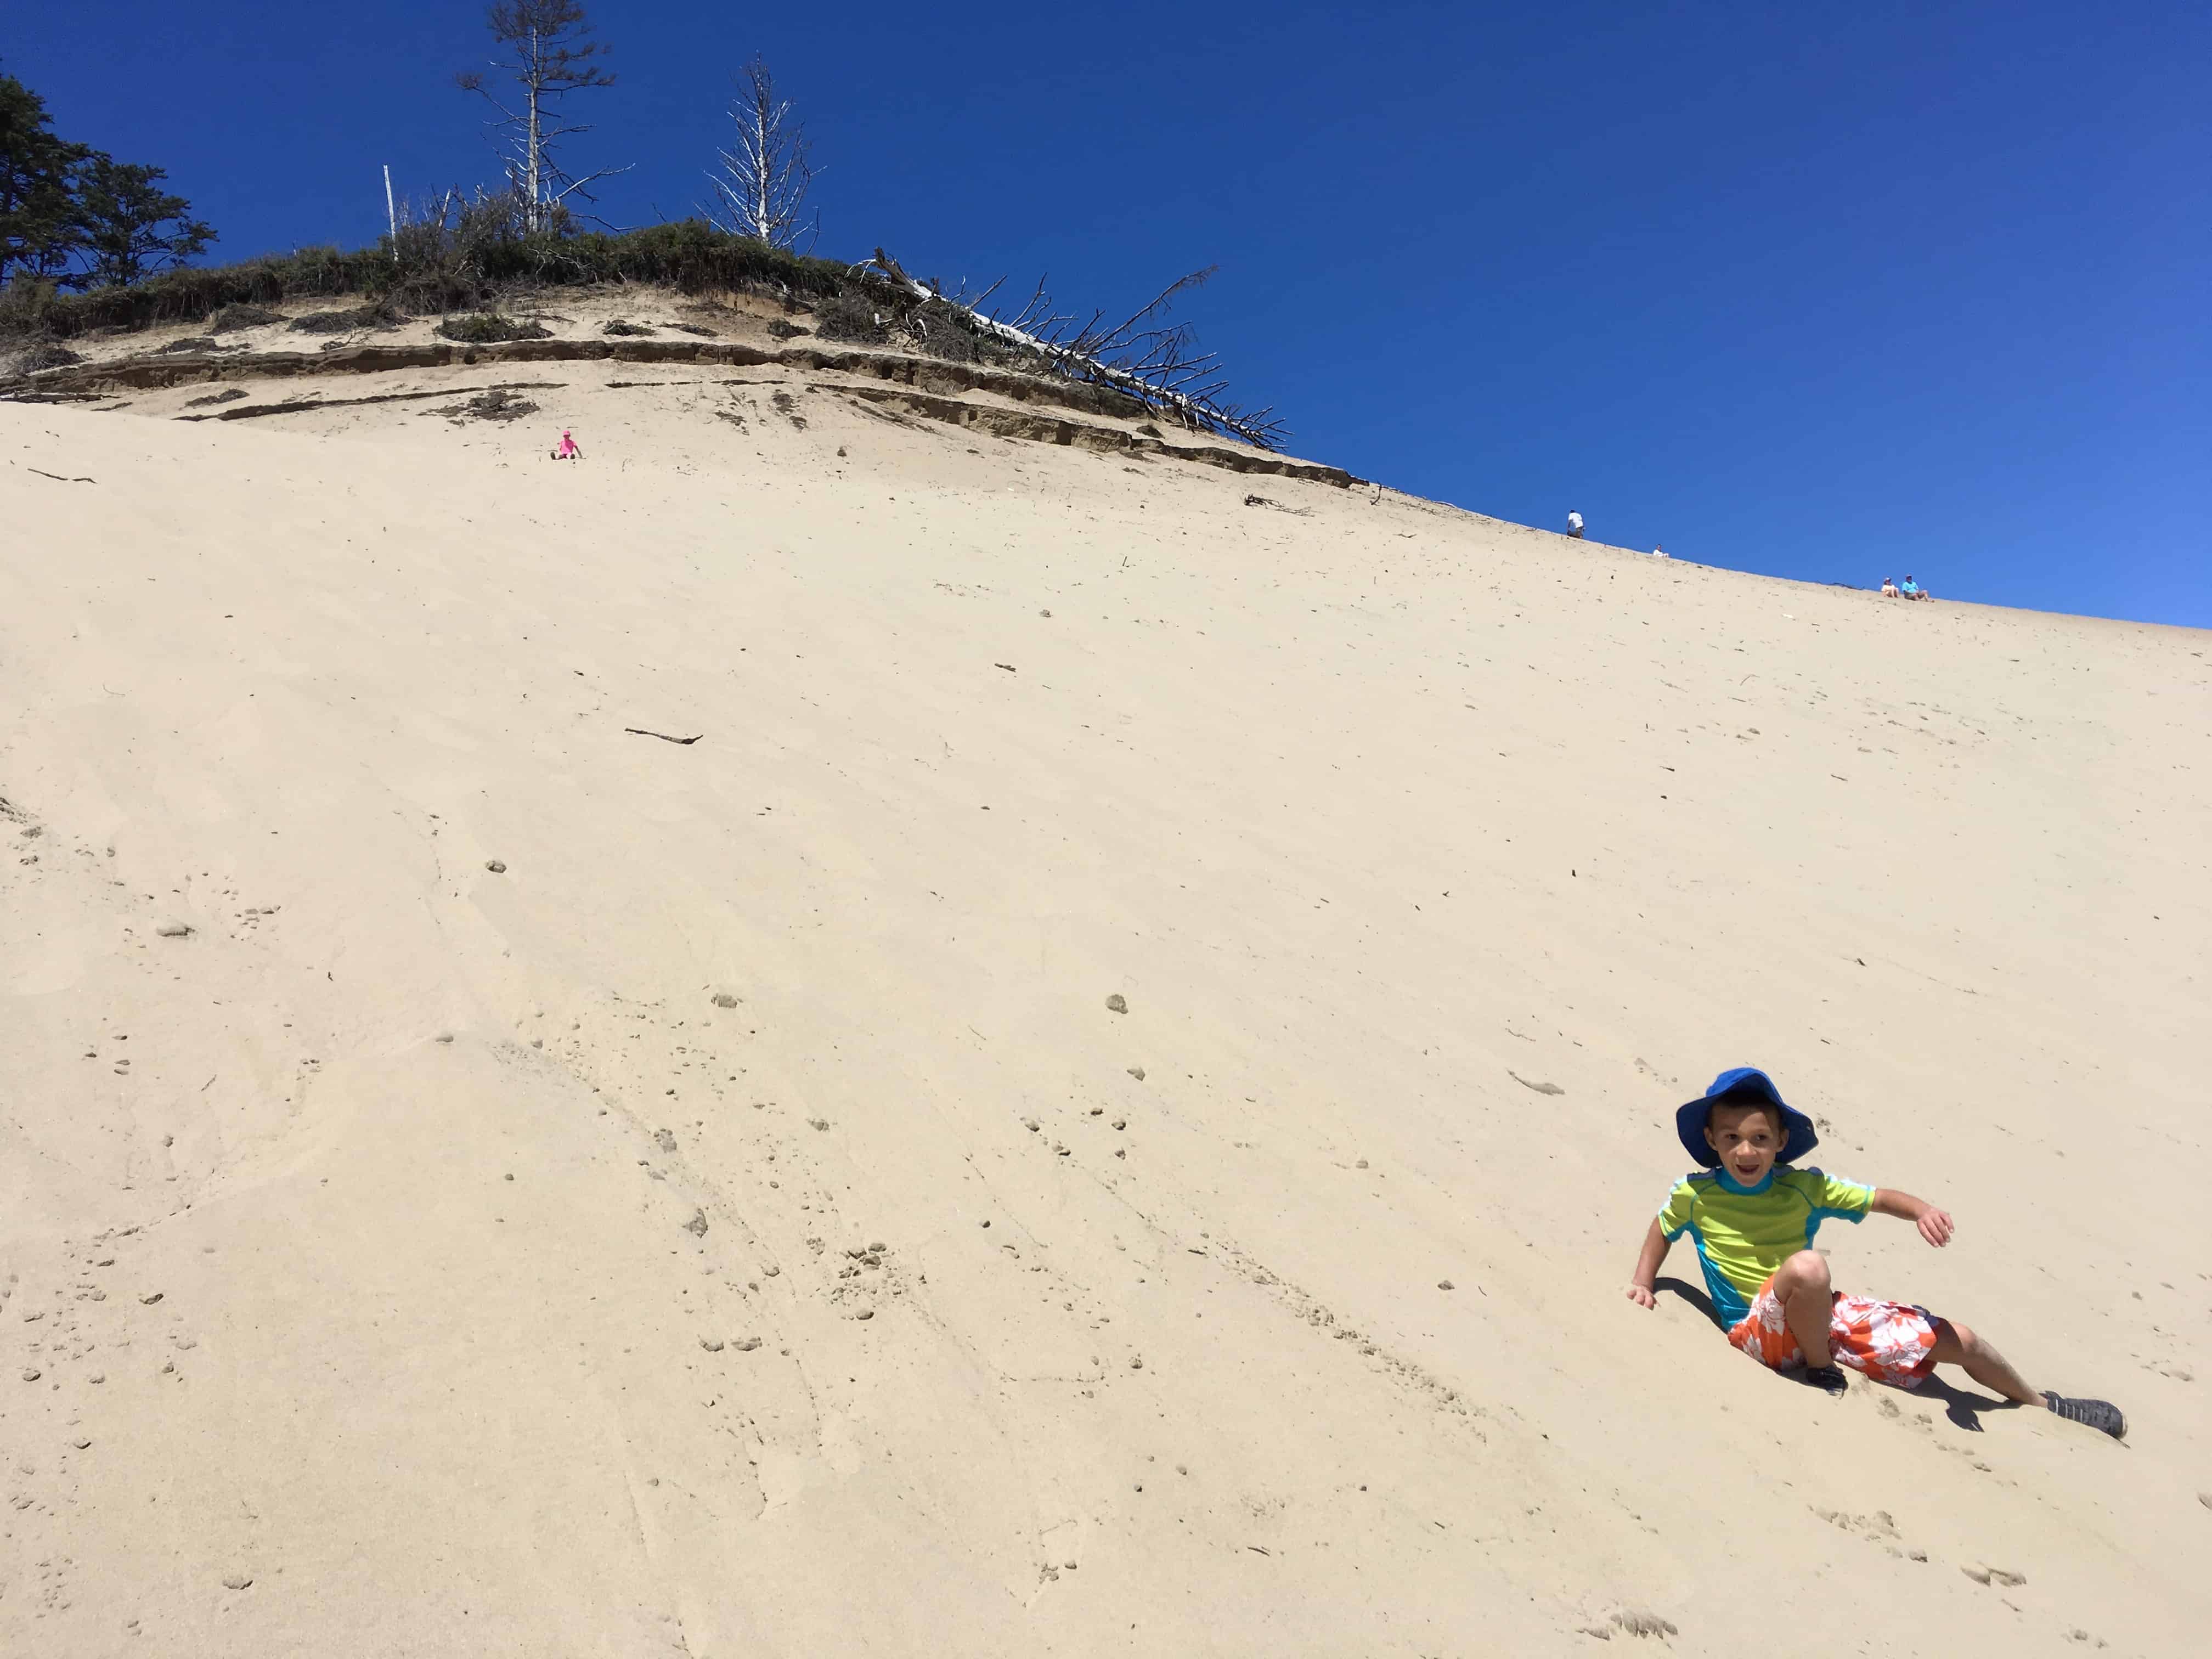 Kid climbing sand dune. The dune is a fun thing to do in Pacific City oregon with kids.